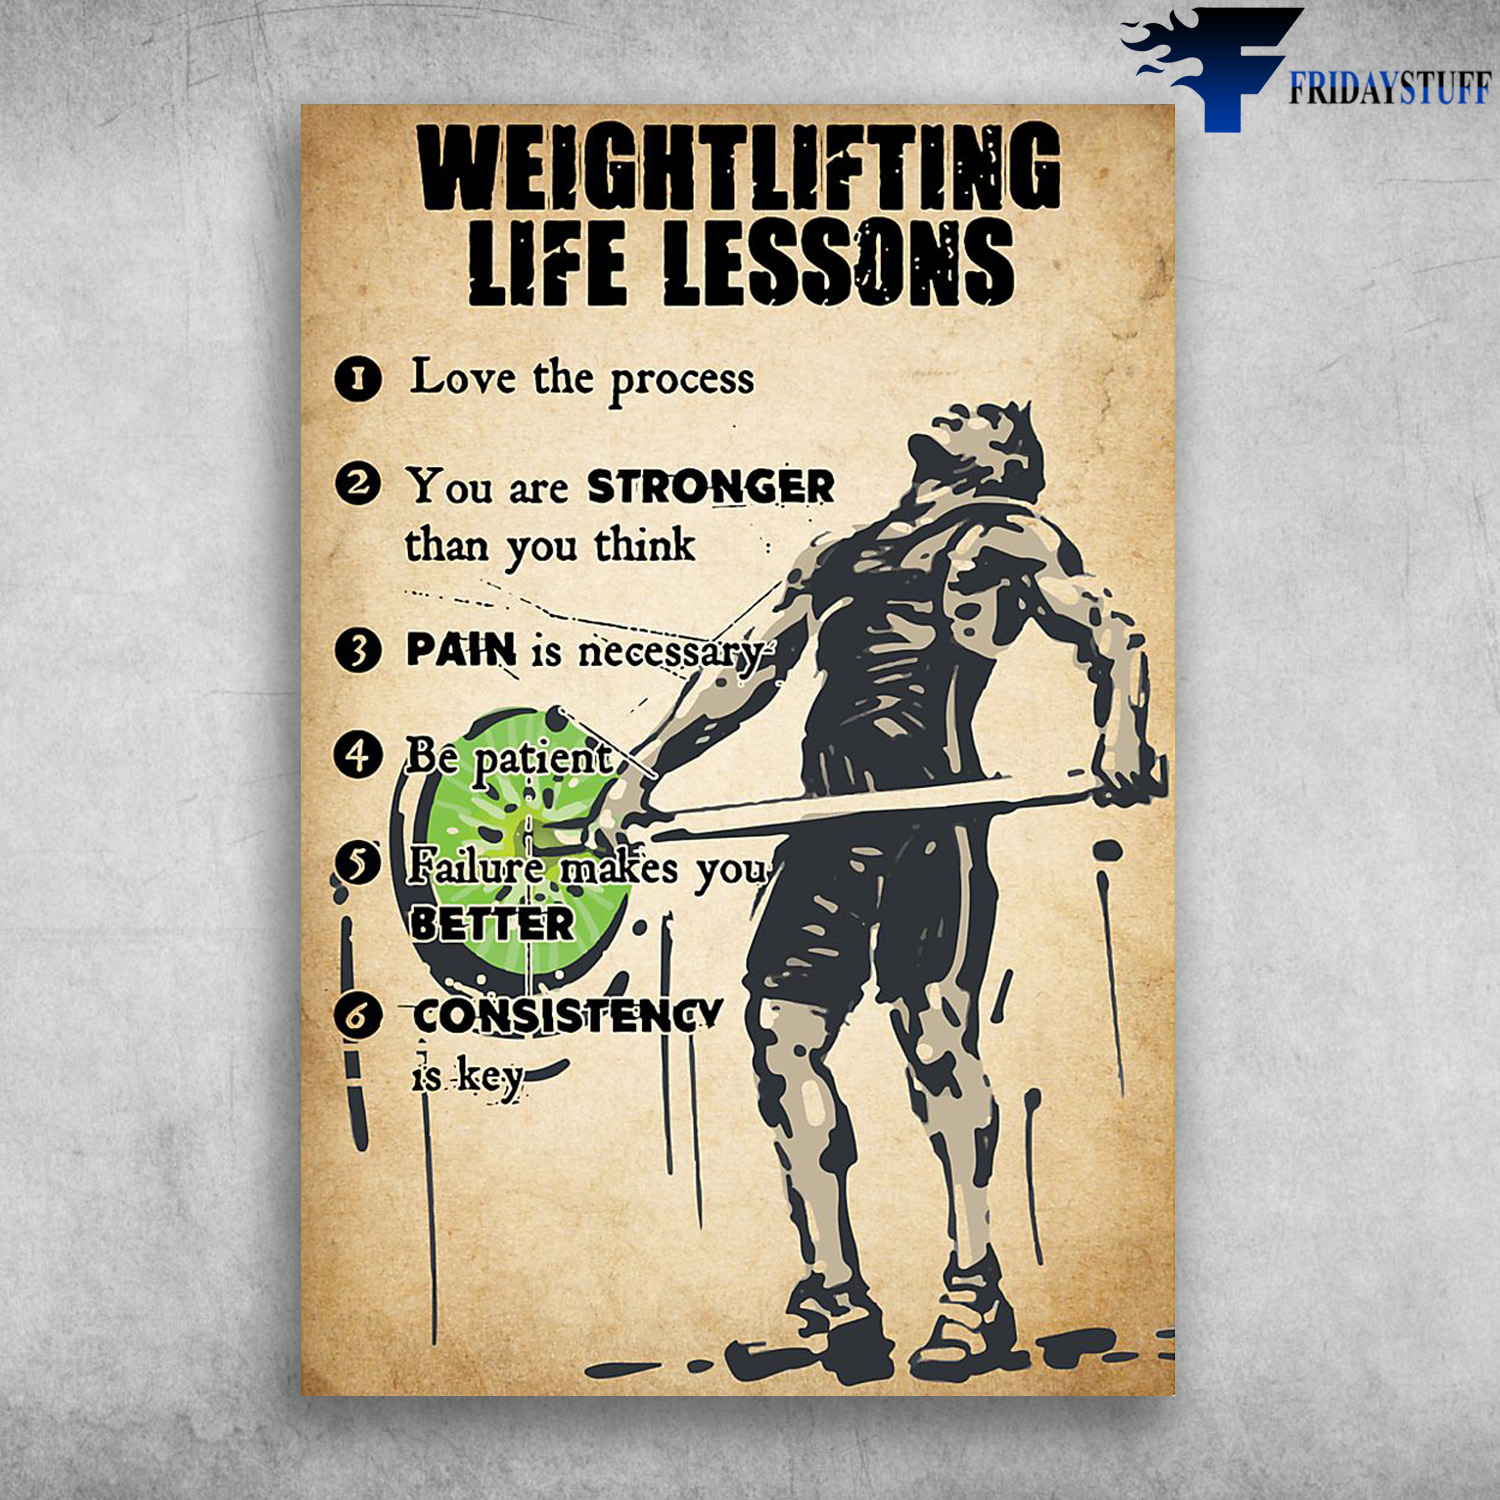 Weightlifting Life Lessons - Love The Process, You Are Stronger Than You Think, Pain Is Necessary, Be Patient, Failure Makes You Better, Consistency Is Key